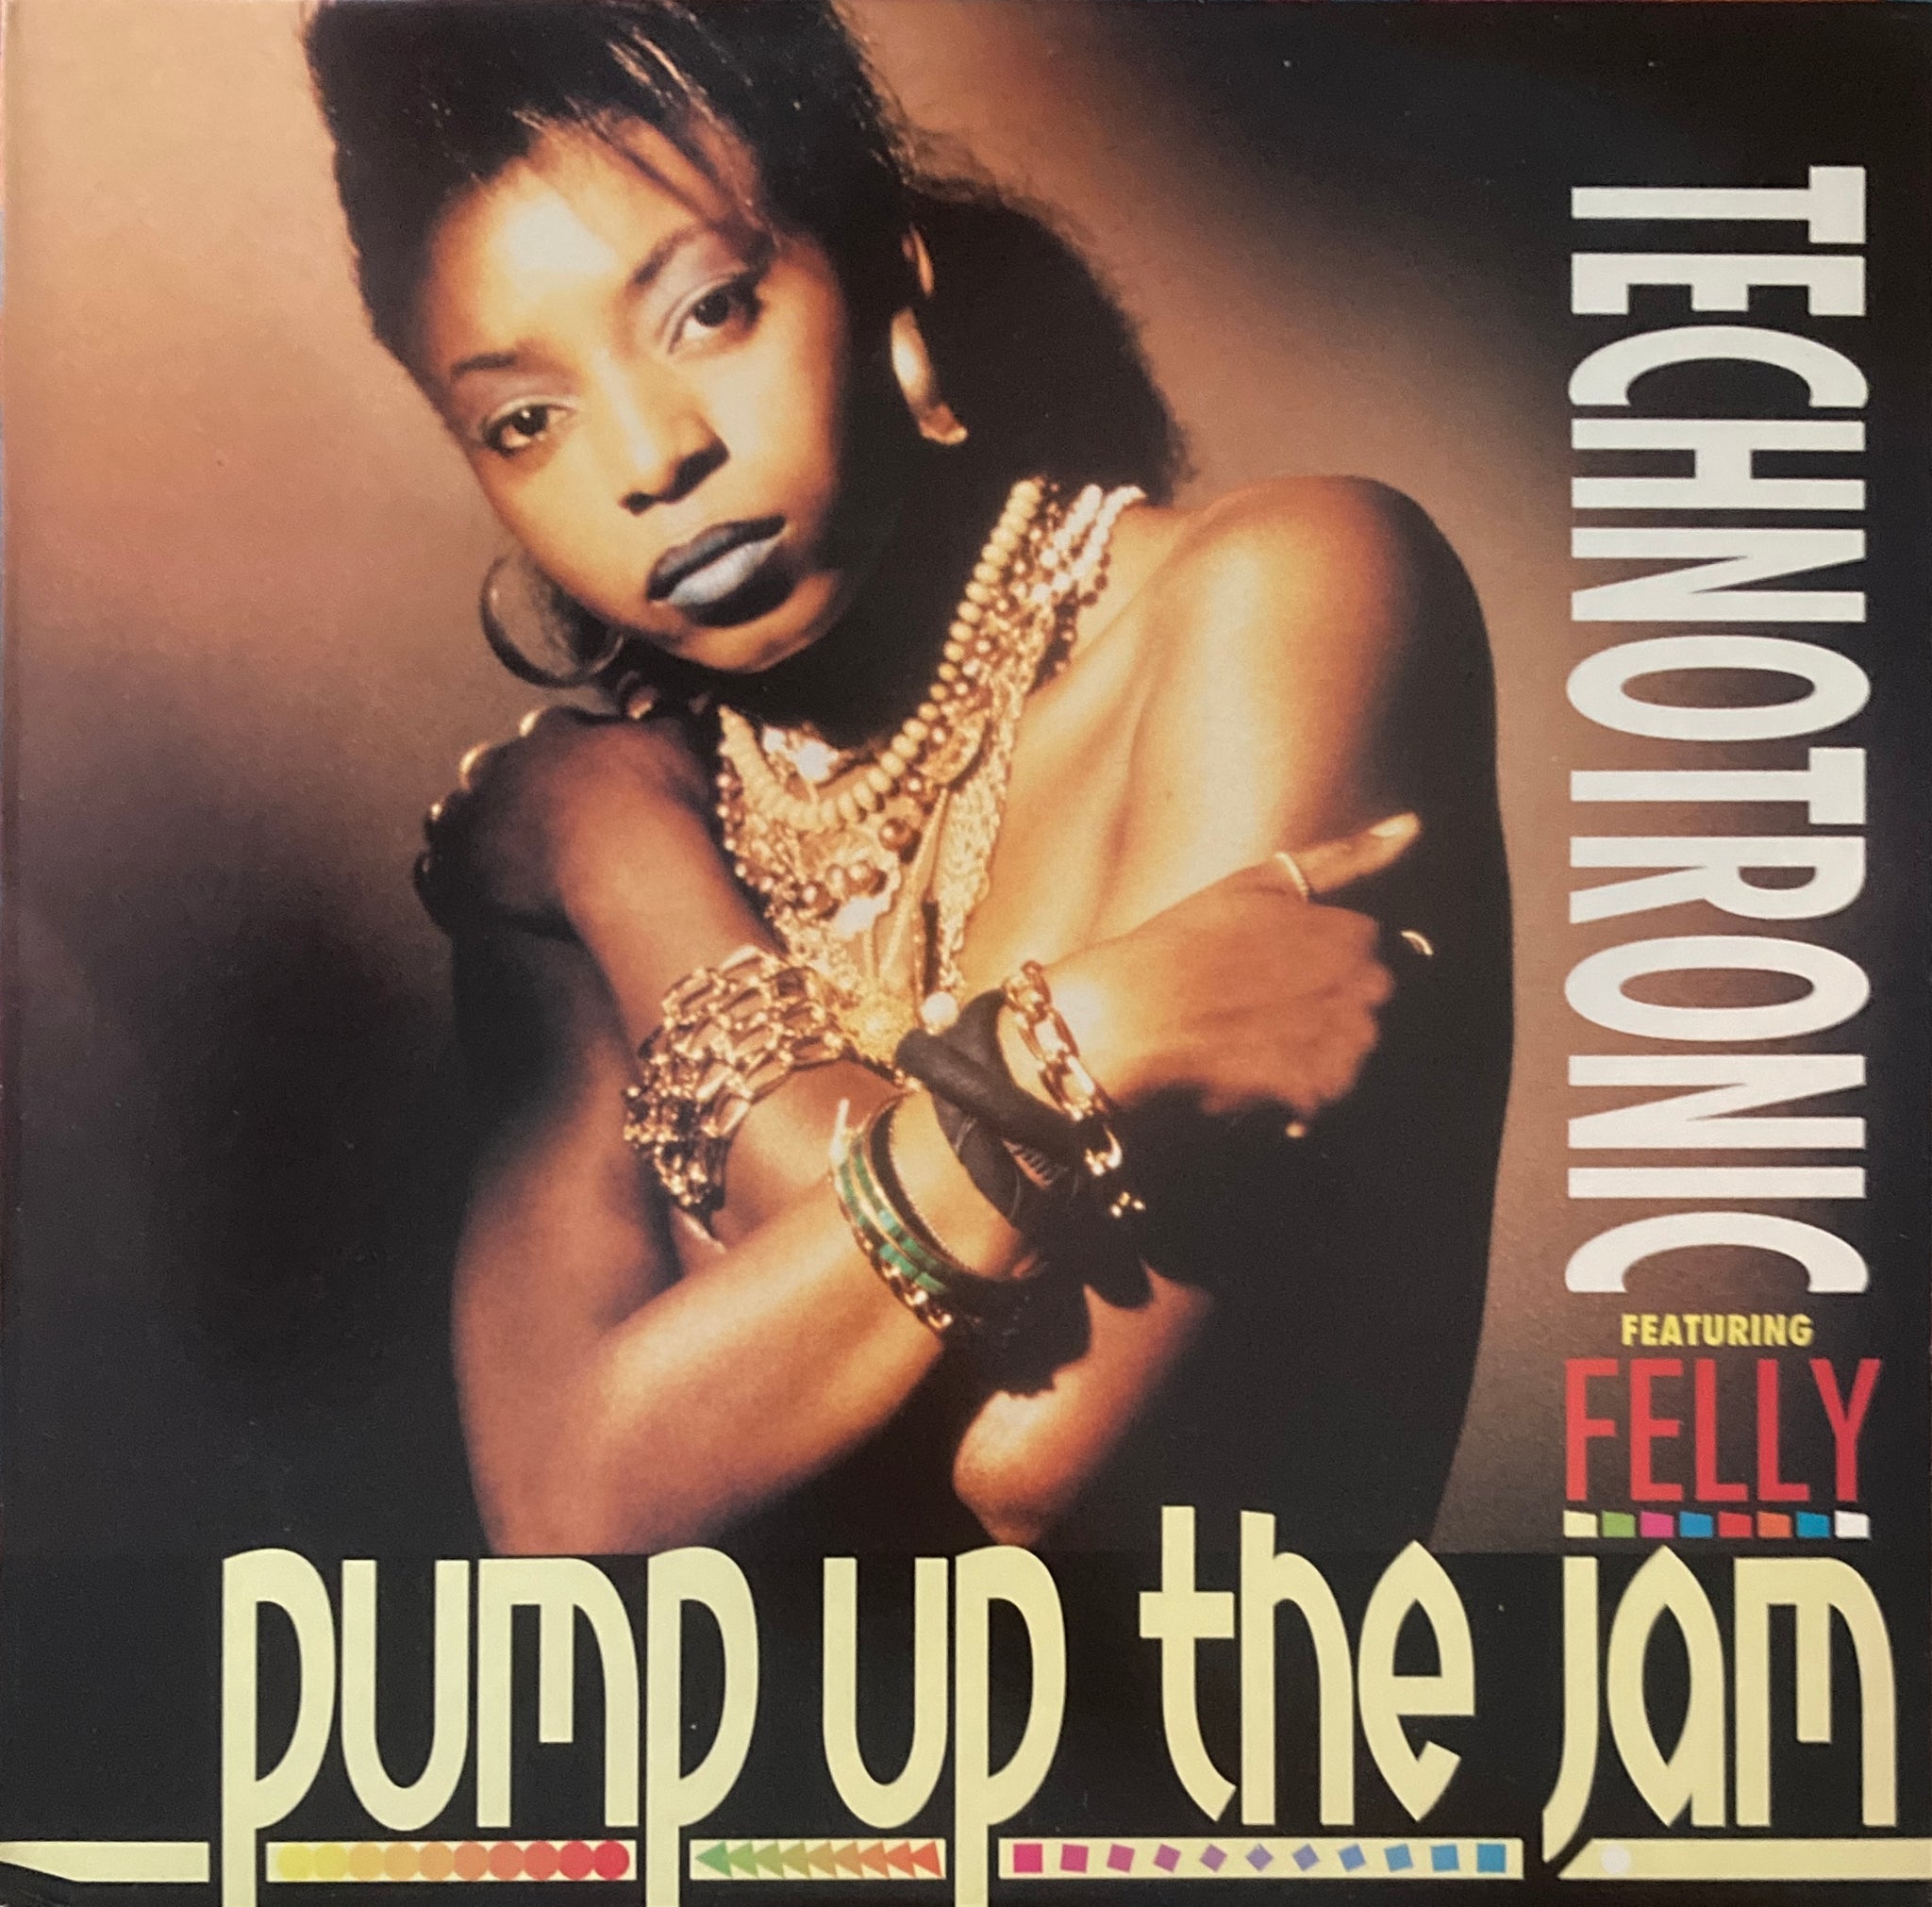 Technotronic Featuring Felly "Pump Up The Jam" 12" Single (1989)